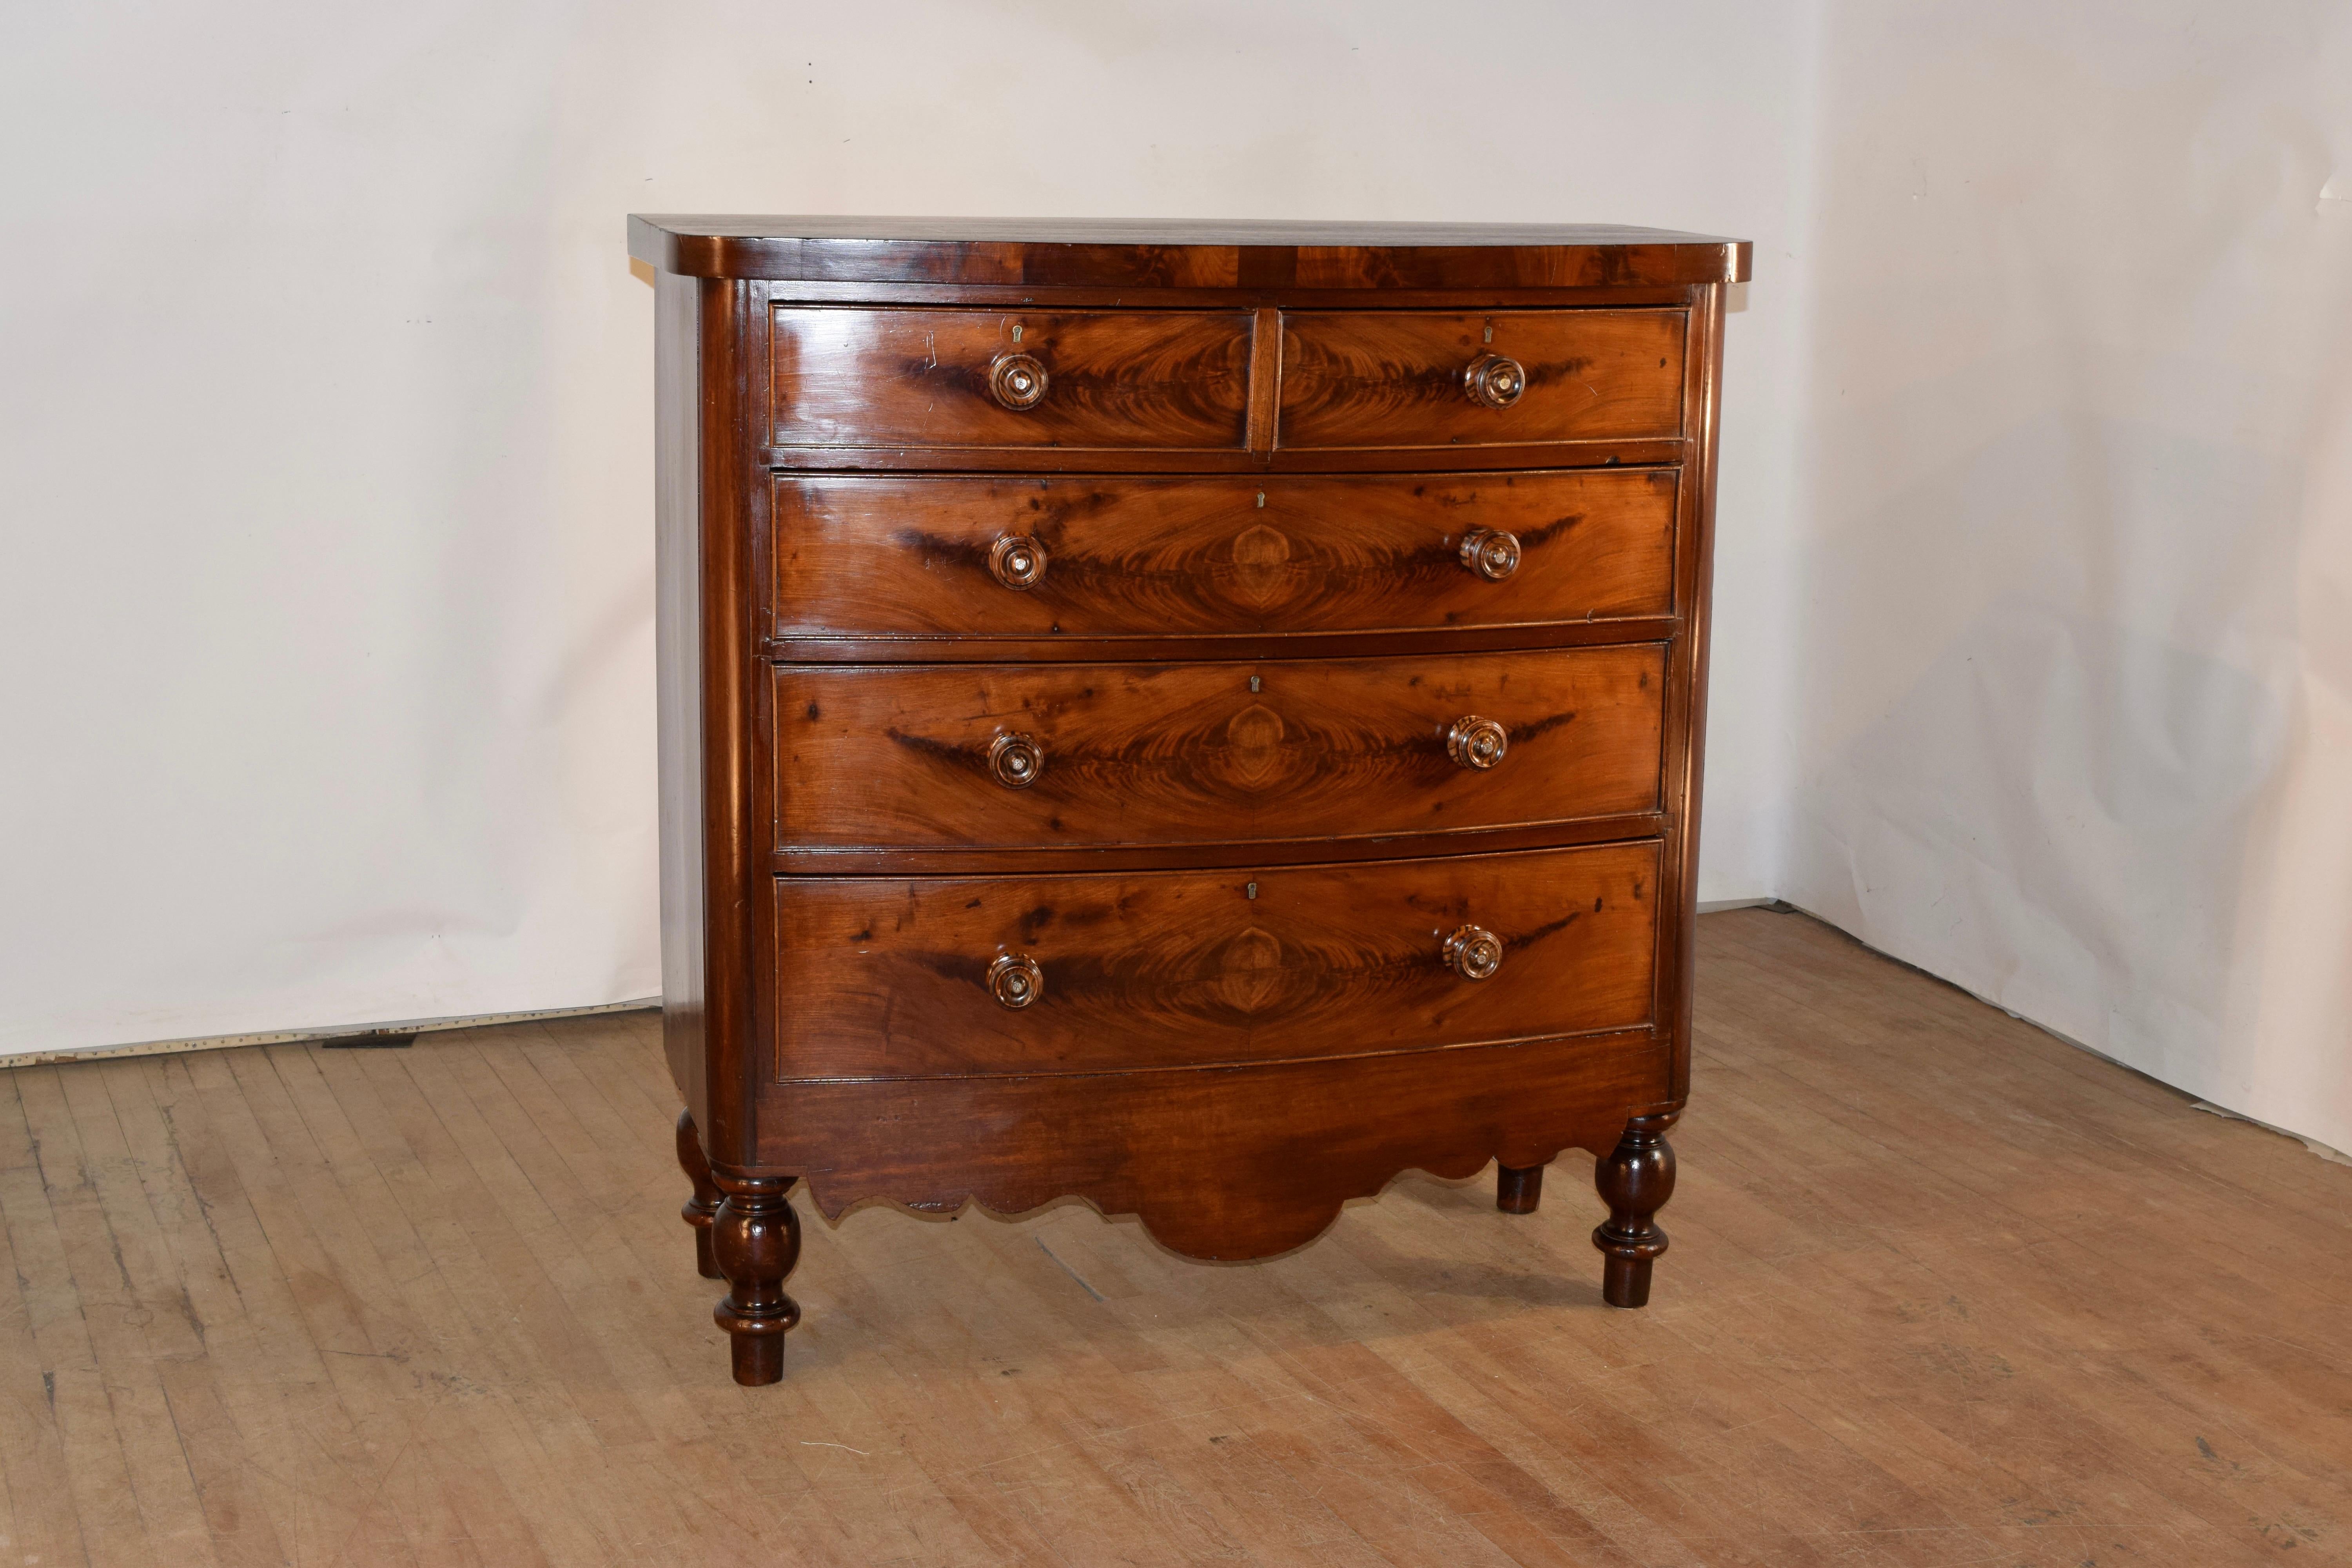 Superb quality 19th century mahogany chest of drawers from England with a lovely grained top and banded sides on the top which have flame mahogany veneer for added interest. The case is elegant in its simplicity and has simple sides and two over